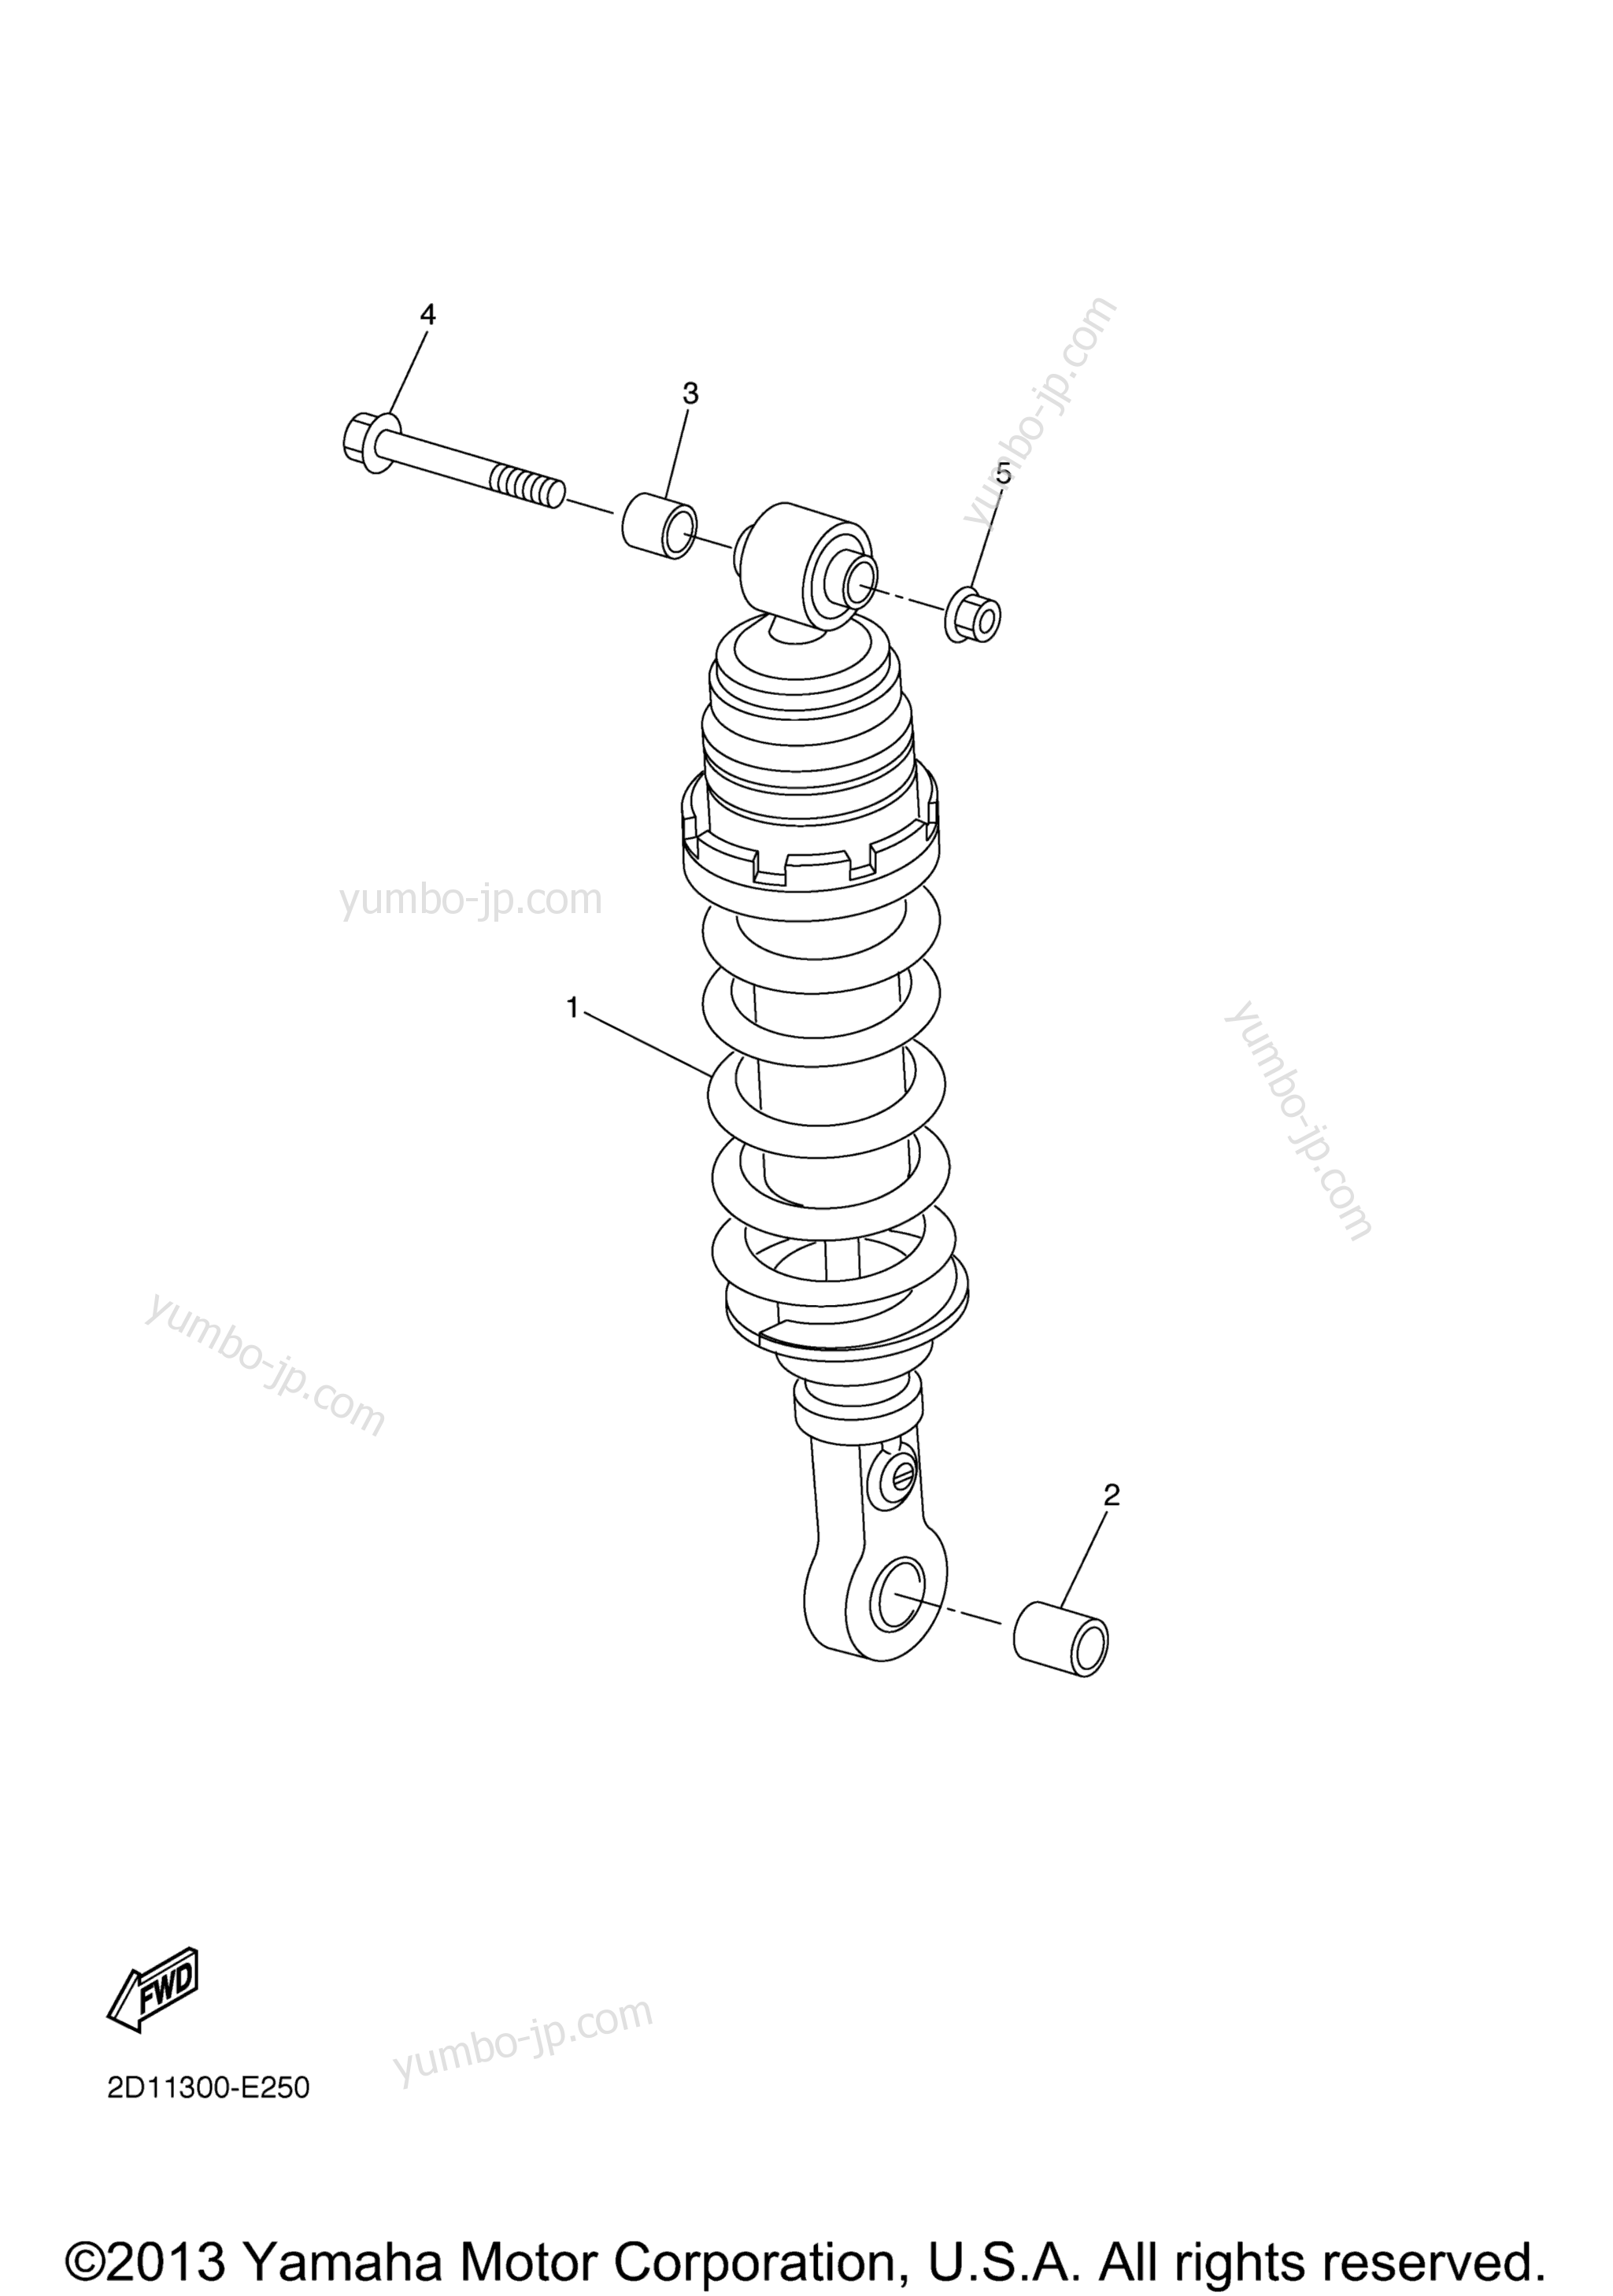 Rear Suspension for motorcycles YAMAHA FZ1 (FZS10WC) CA 2007 year